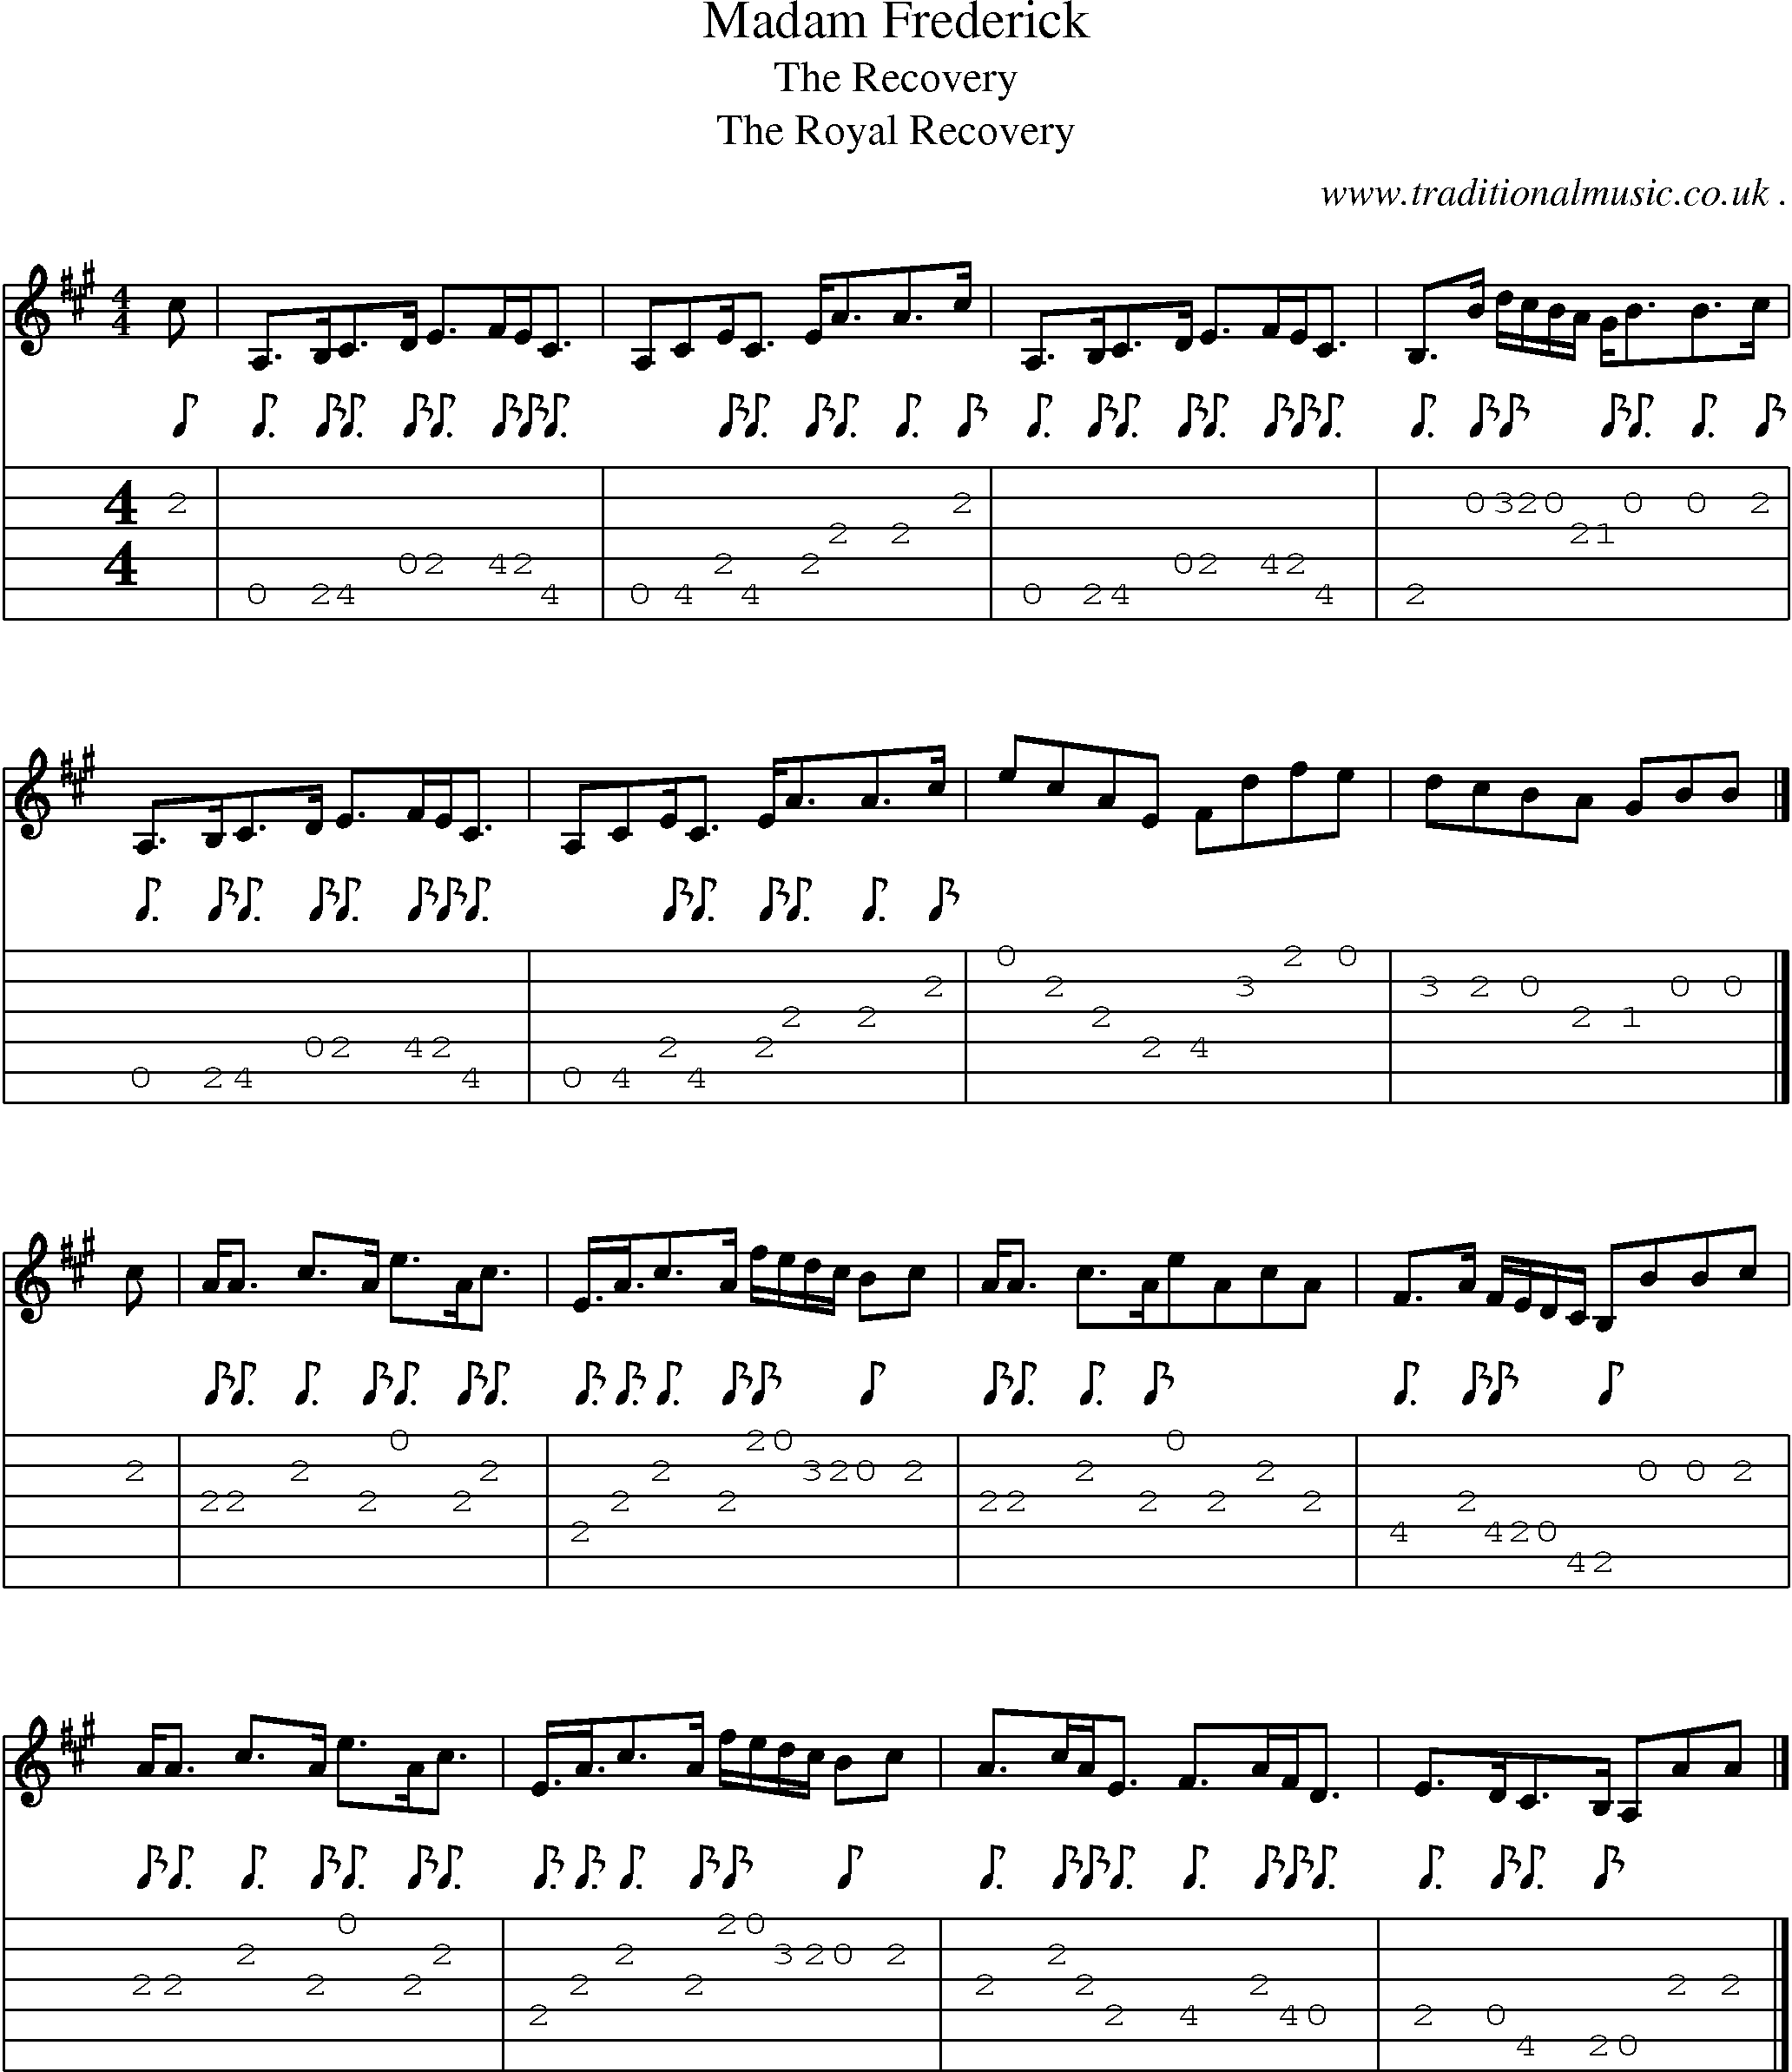 Sheet-music  score, Chords and Guitar Tabs for Madam Frederick